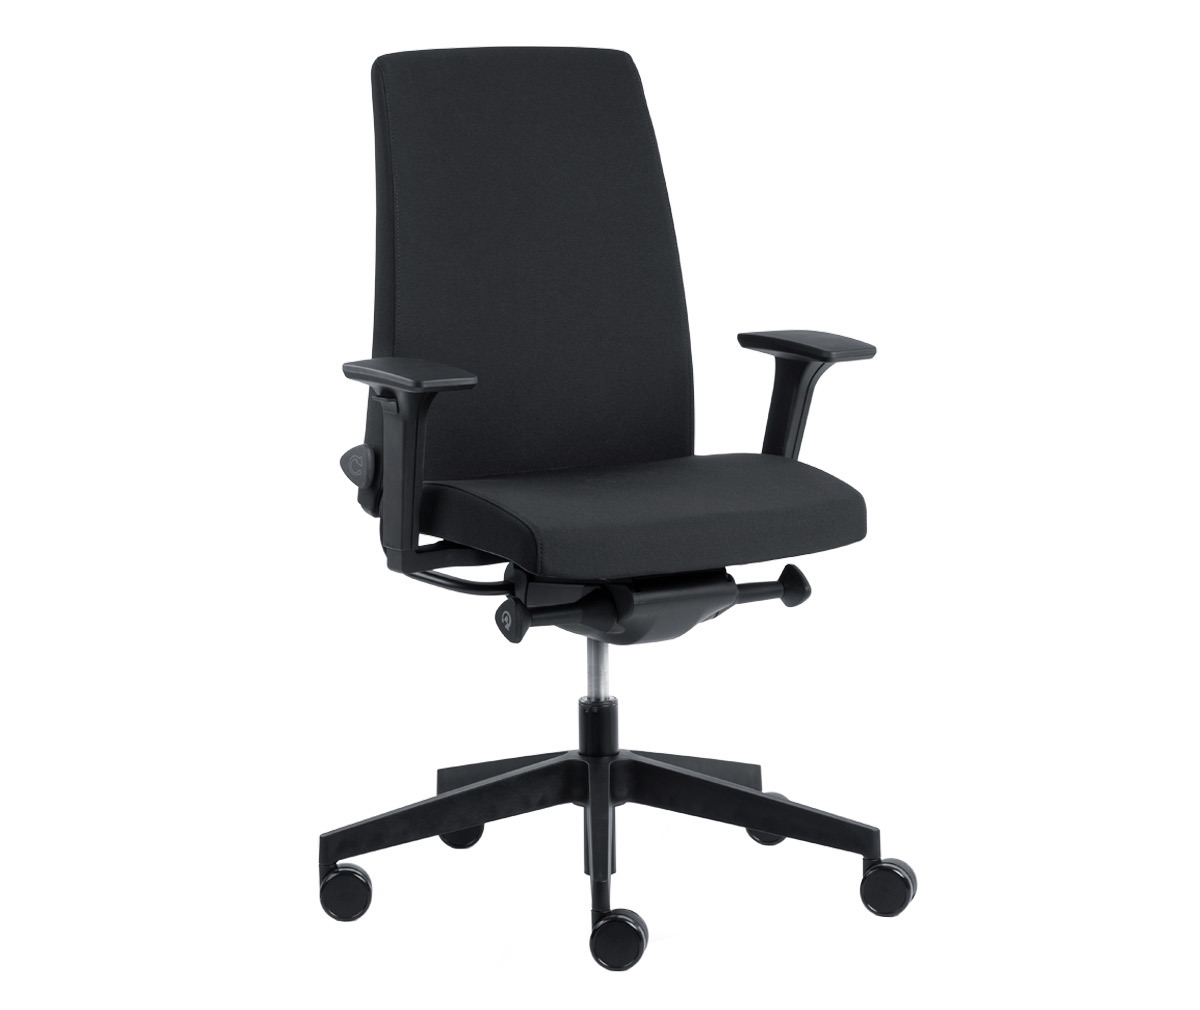 Toplux Motto 10 SL Office Chair Black, Armrests